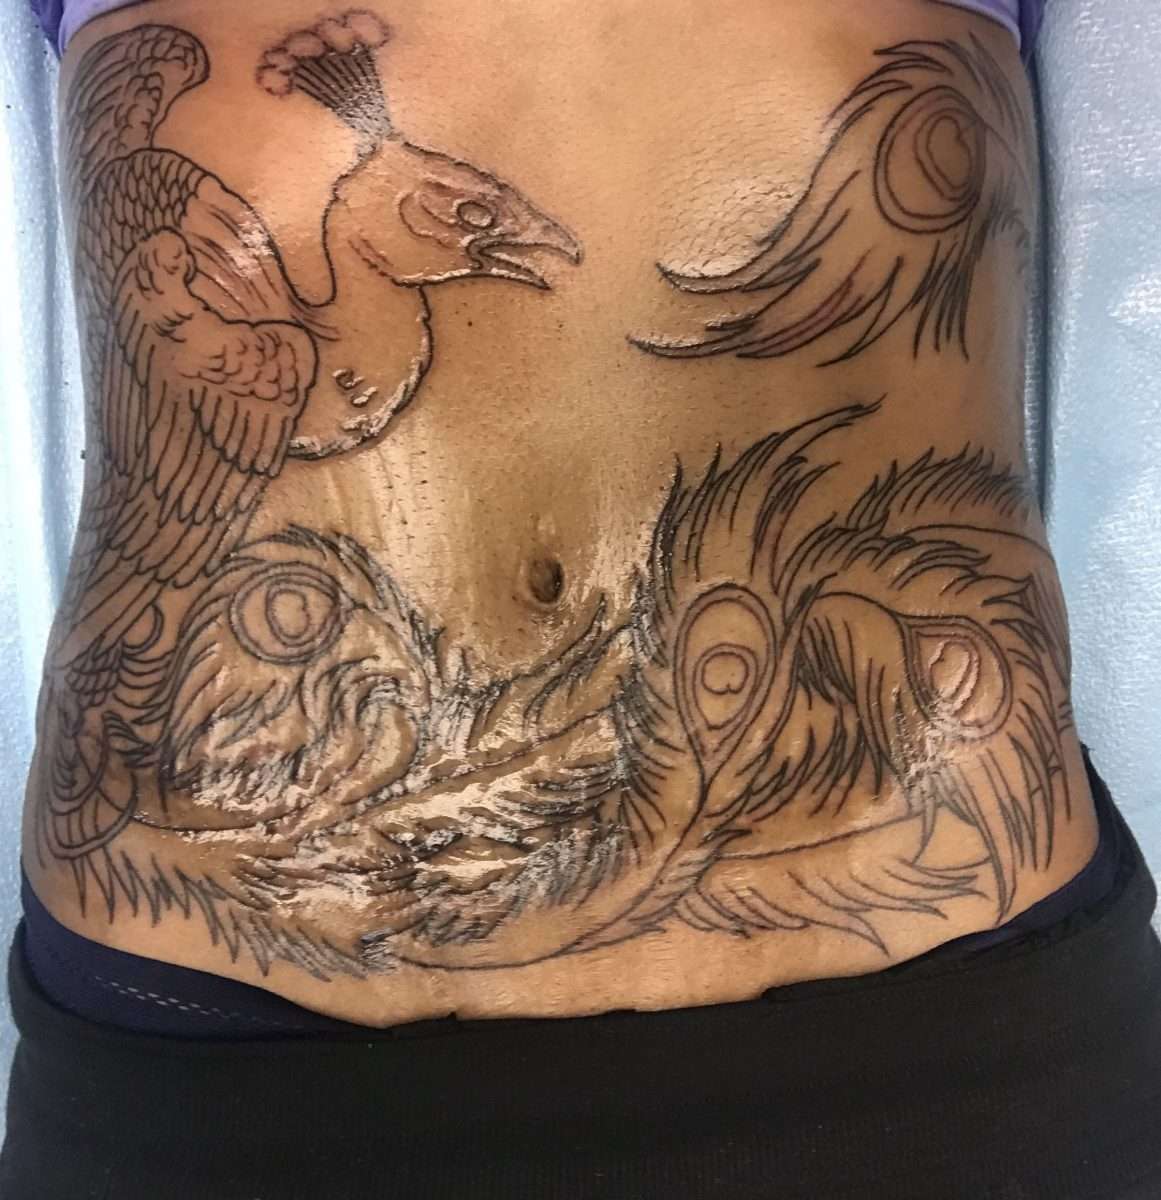 Outline done. Tummy tuck scar cover up! #tummytuck #pheonix #lovemyink ...